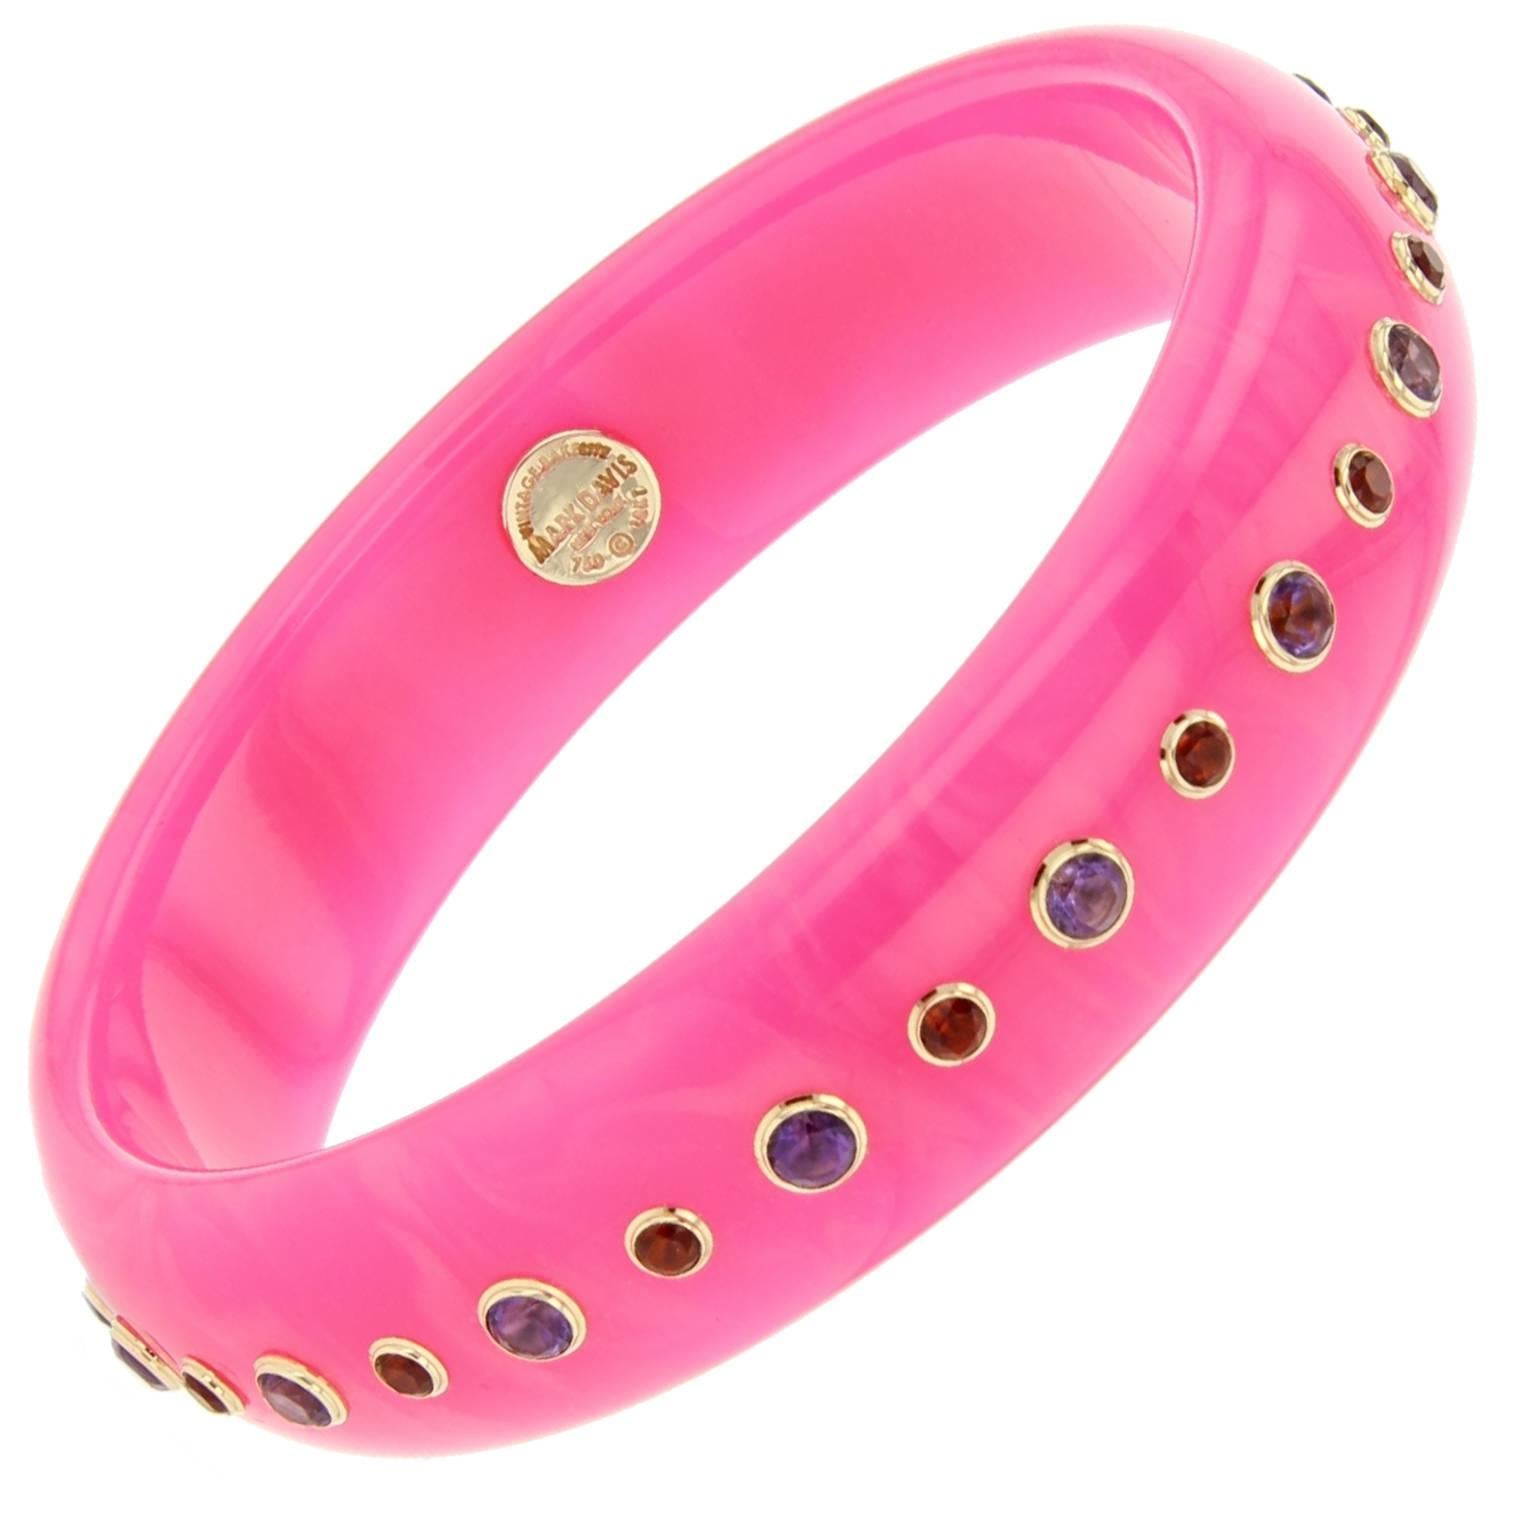 This delightful bangle is part of the Mark Davis Bakelite Collection. It was handcrafted using vivid pink bakelite and studded with amethyst and citrine, bezel-set in 18k yellow gold.    

Full details below: 
• From the Mark Davis Bakelite